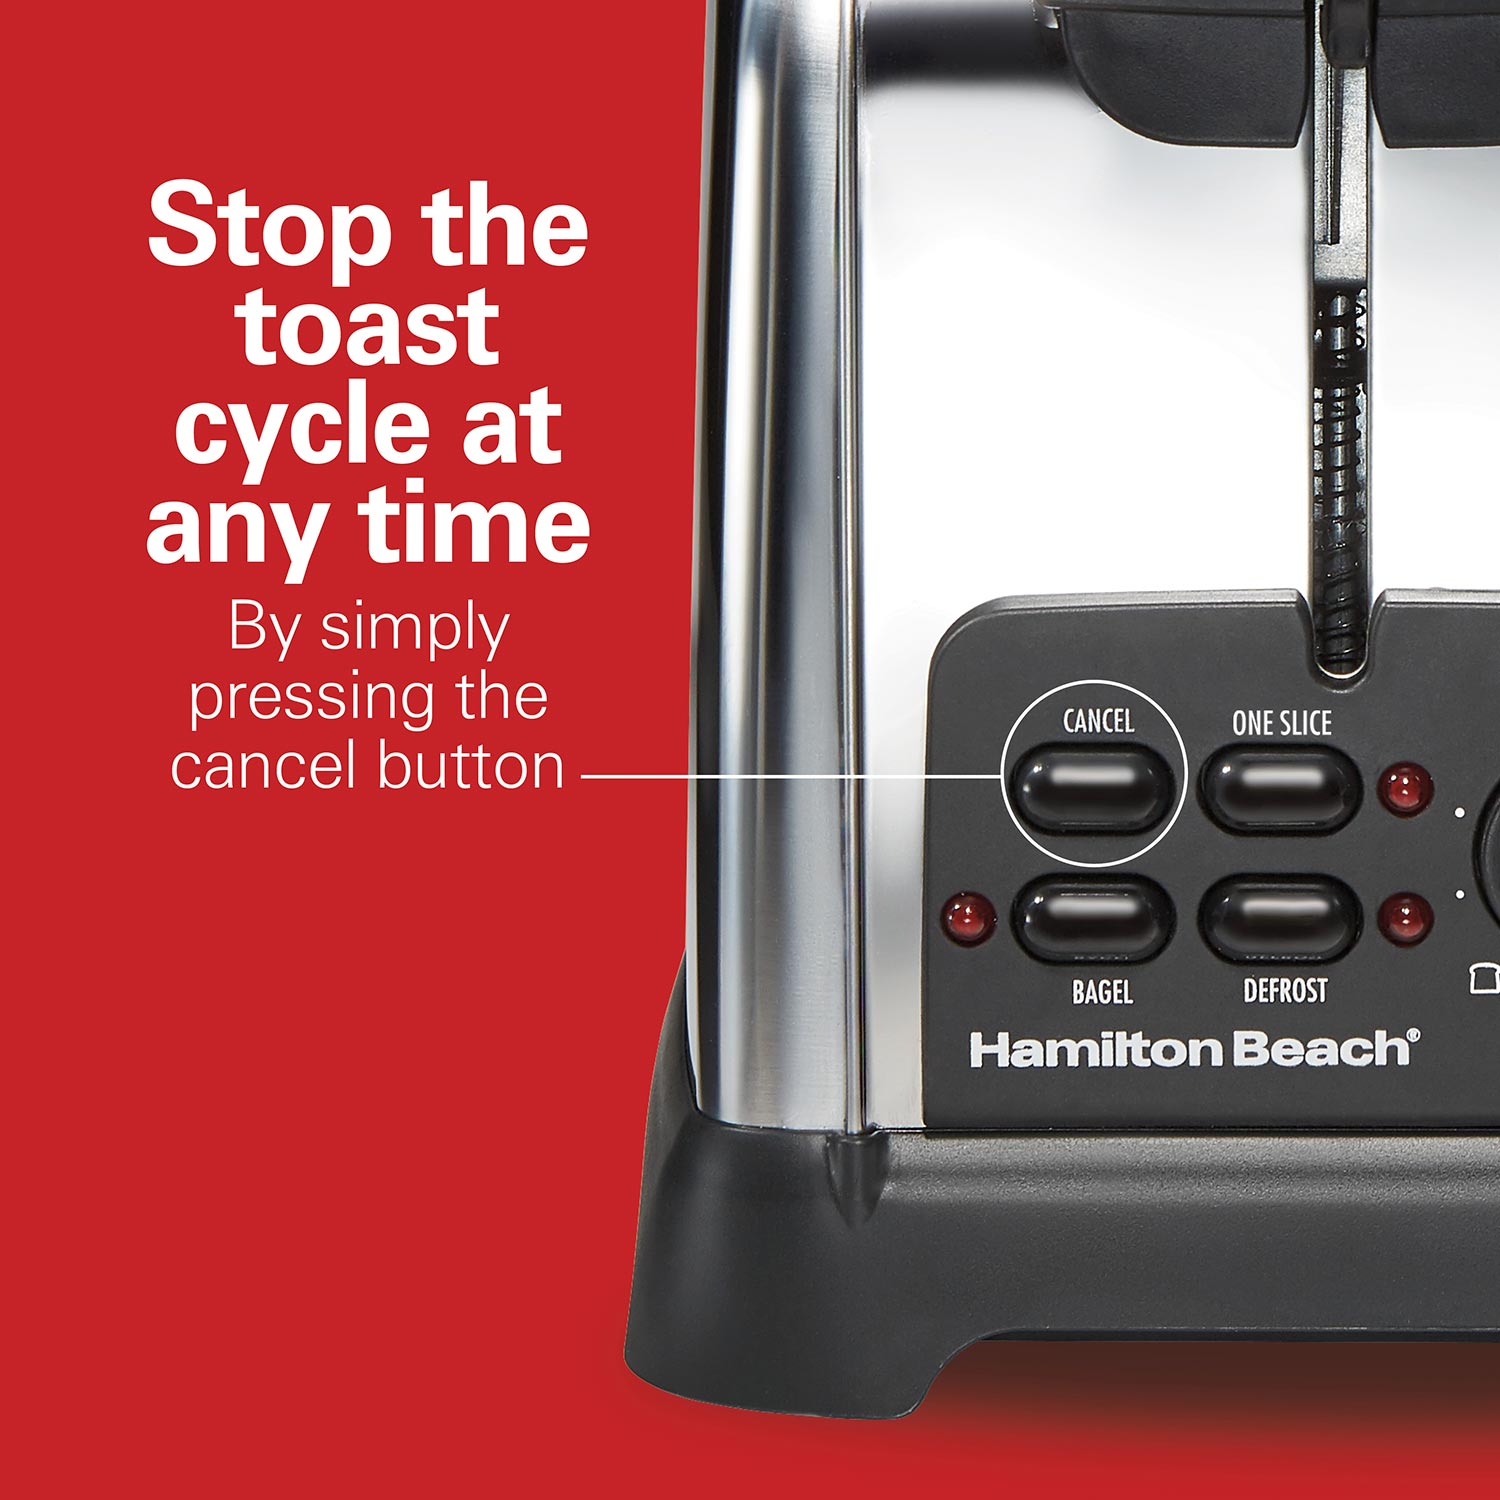 Hamilton Beach 4-Slice Classic Toaster with Sure-Toast Technology in  Stainless Steel and Black